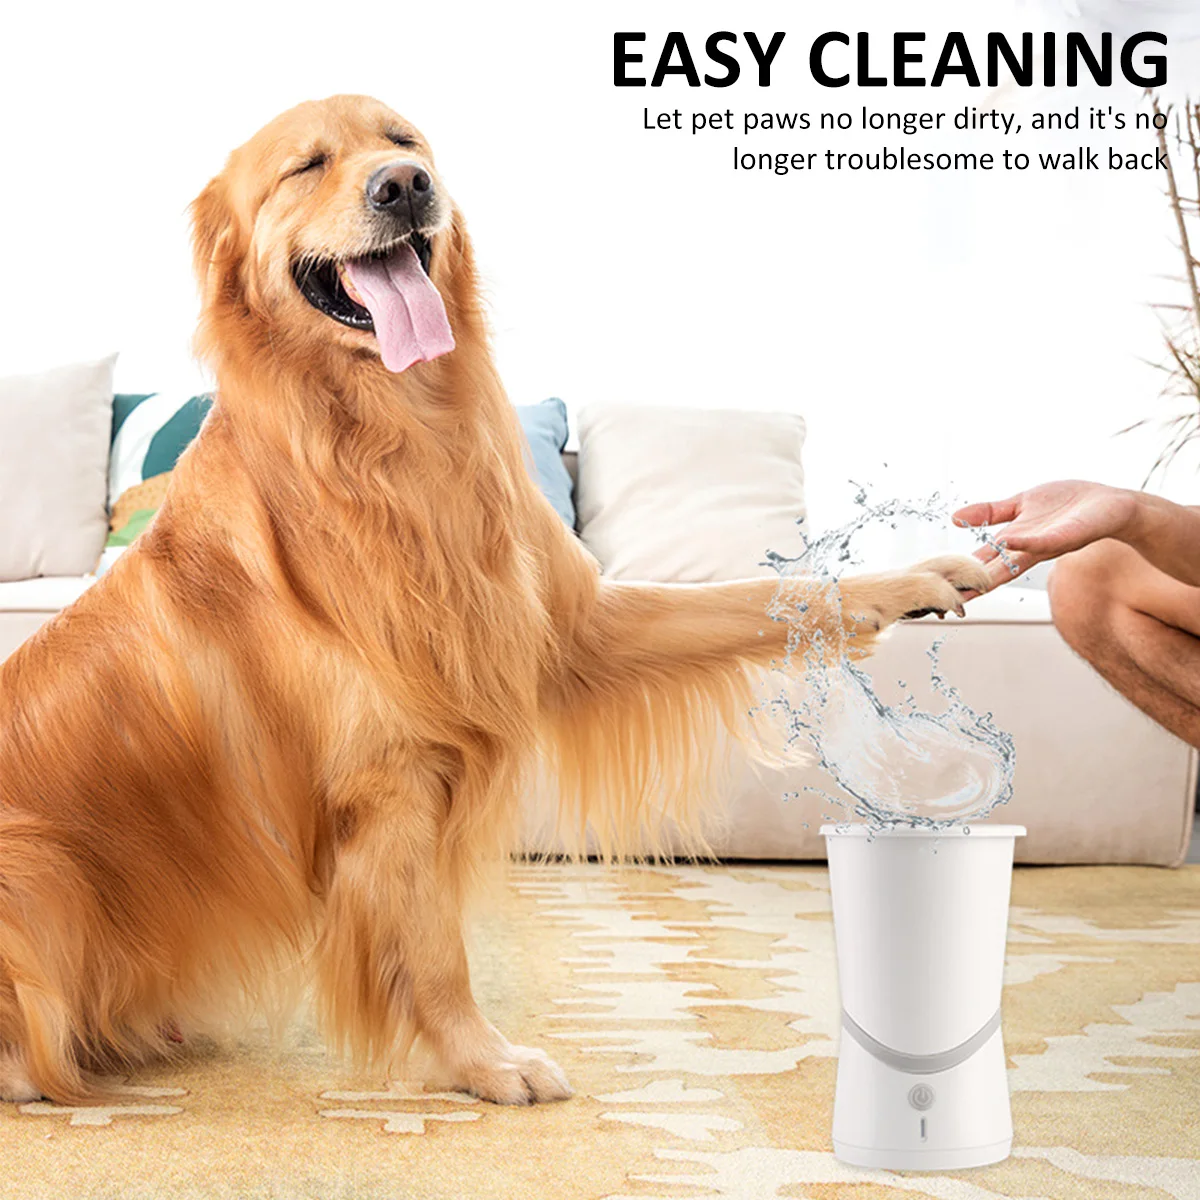 

Automatic Dogs Paw Cleaner Portable Washer Cup USB Charging Pet Feet Silicone Cleaning Brush for Dog and Cat Grooming Muddy Paws